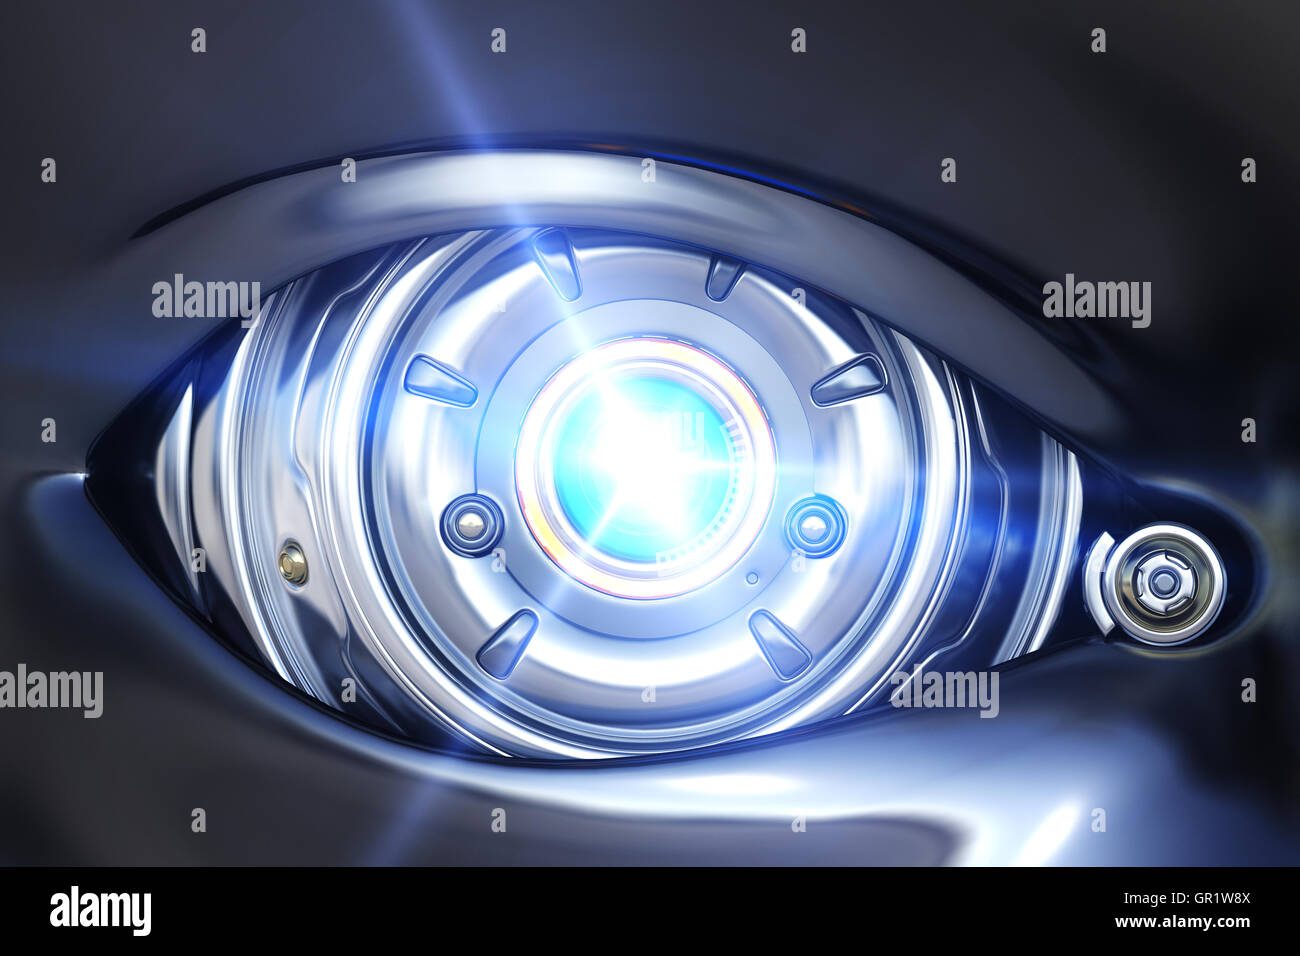 Cyber eye close up with shining light Stock Photo